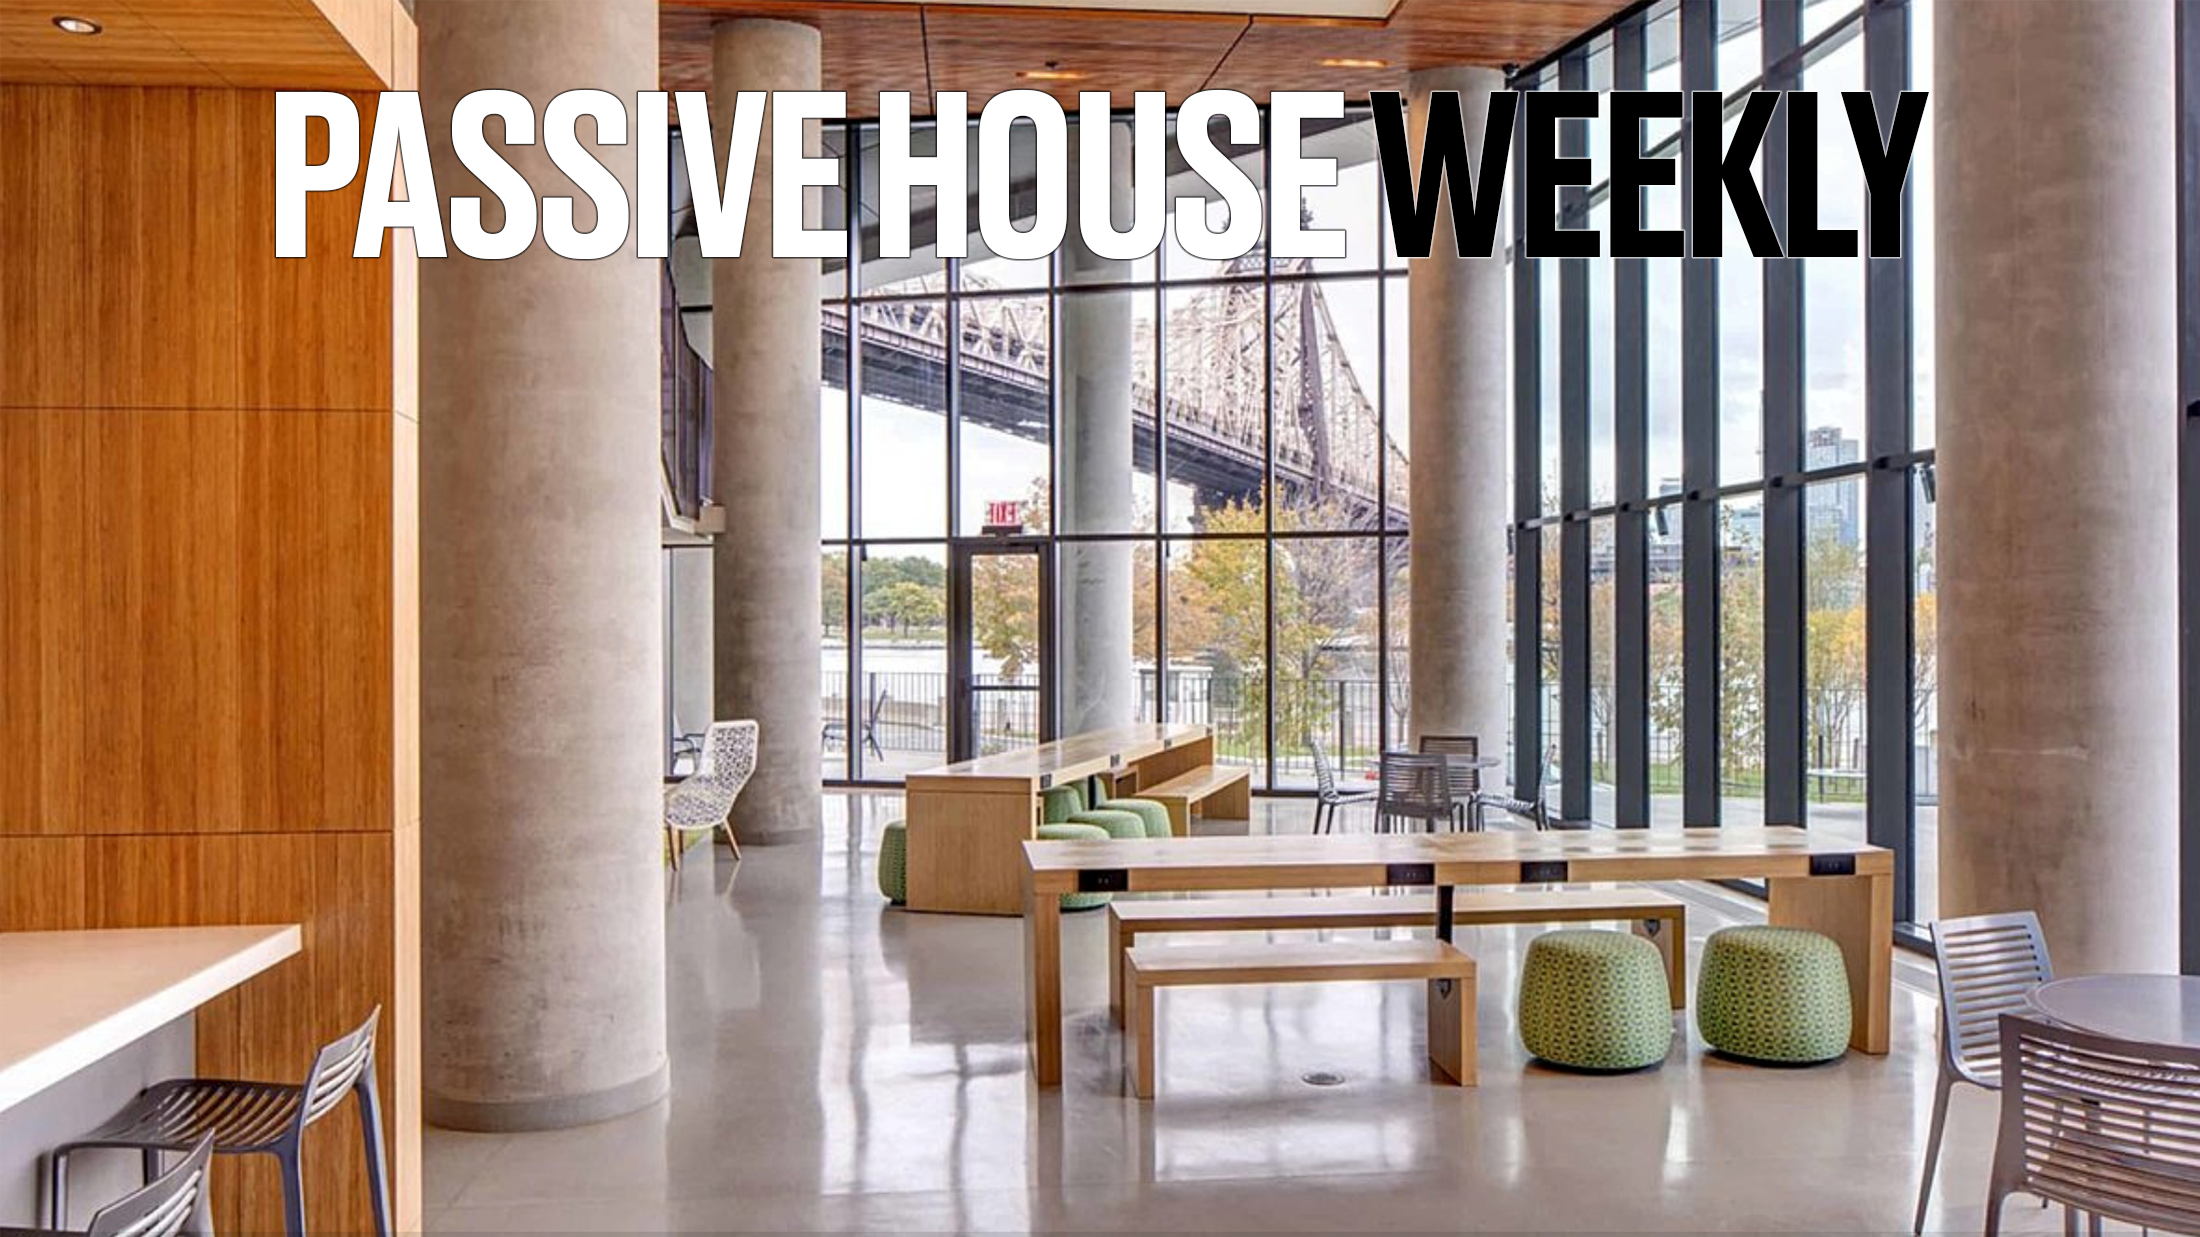 Passive House Weekly: April 11, 2022